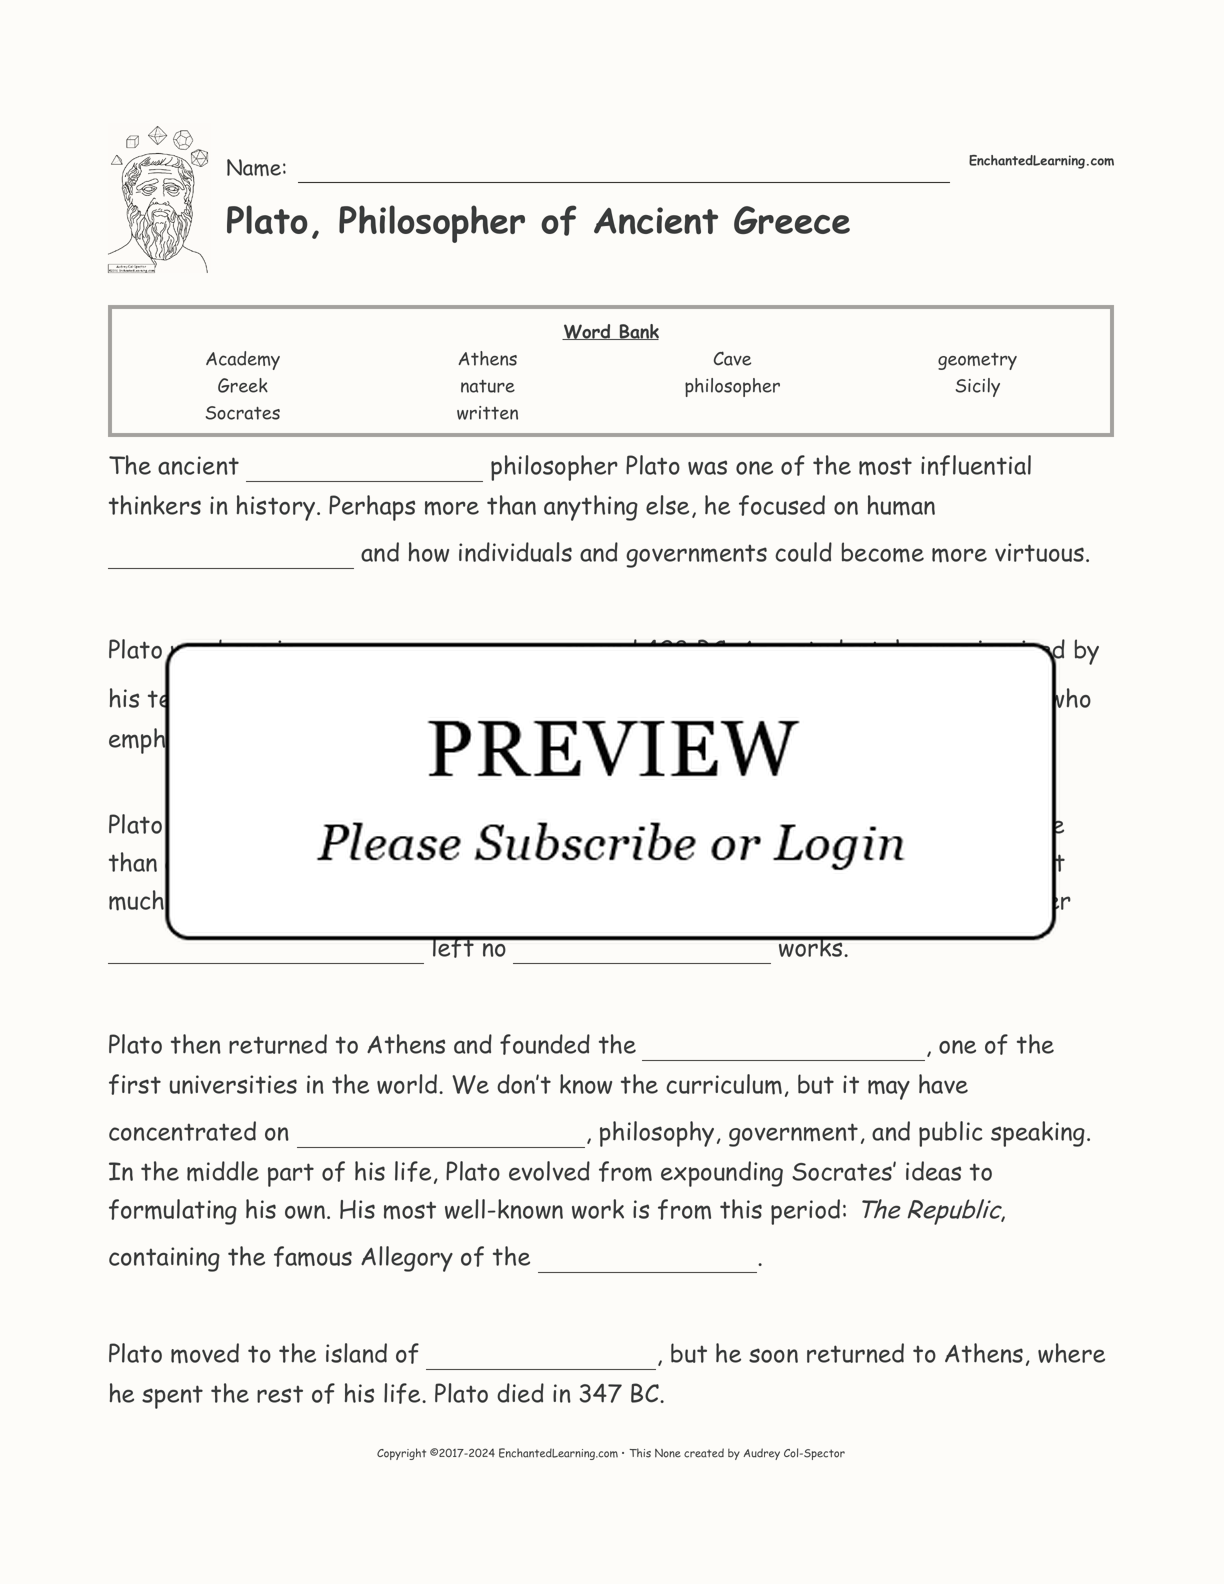 Plato, Philosopher of Ancient Greece interactive worksheet page 1